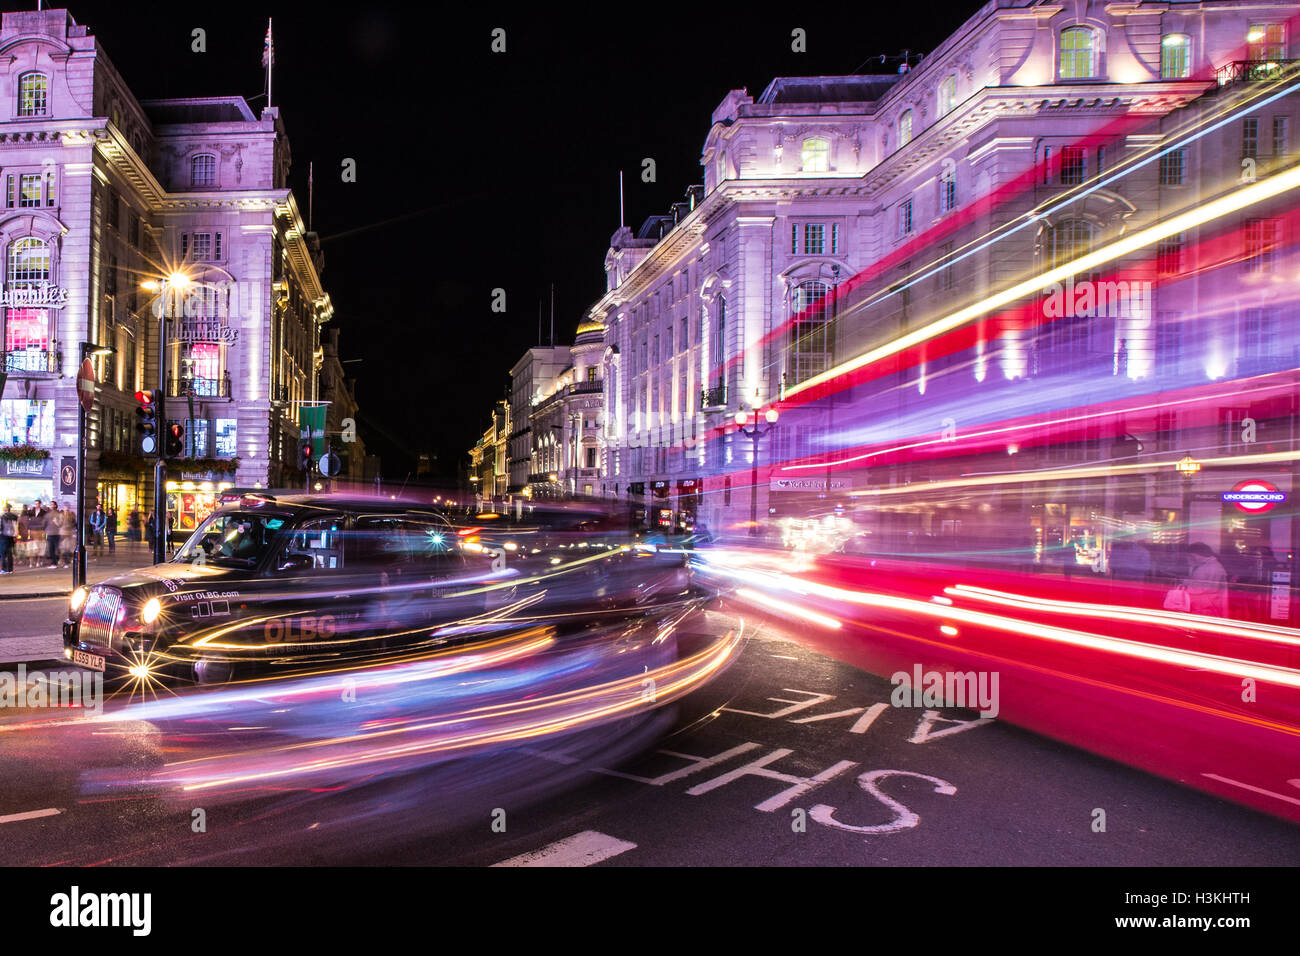 Light Trail Trails at London Piccadilly Circus Stock Photo